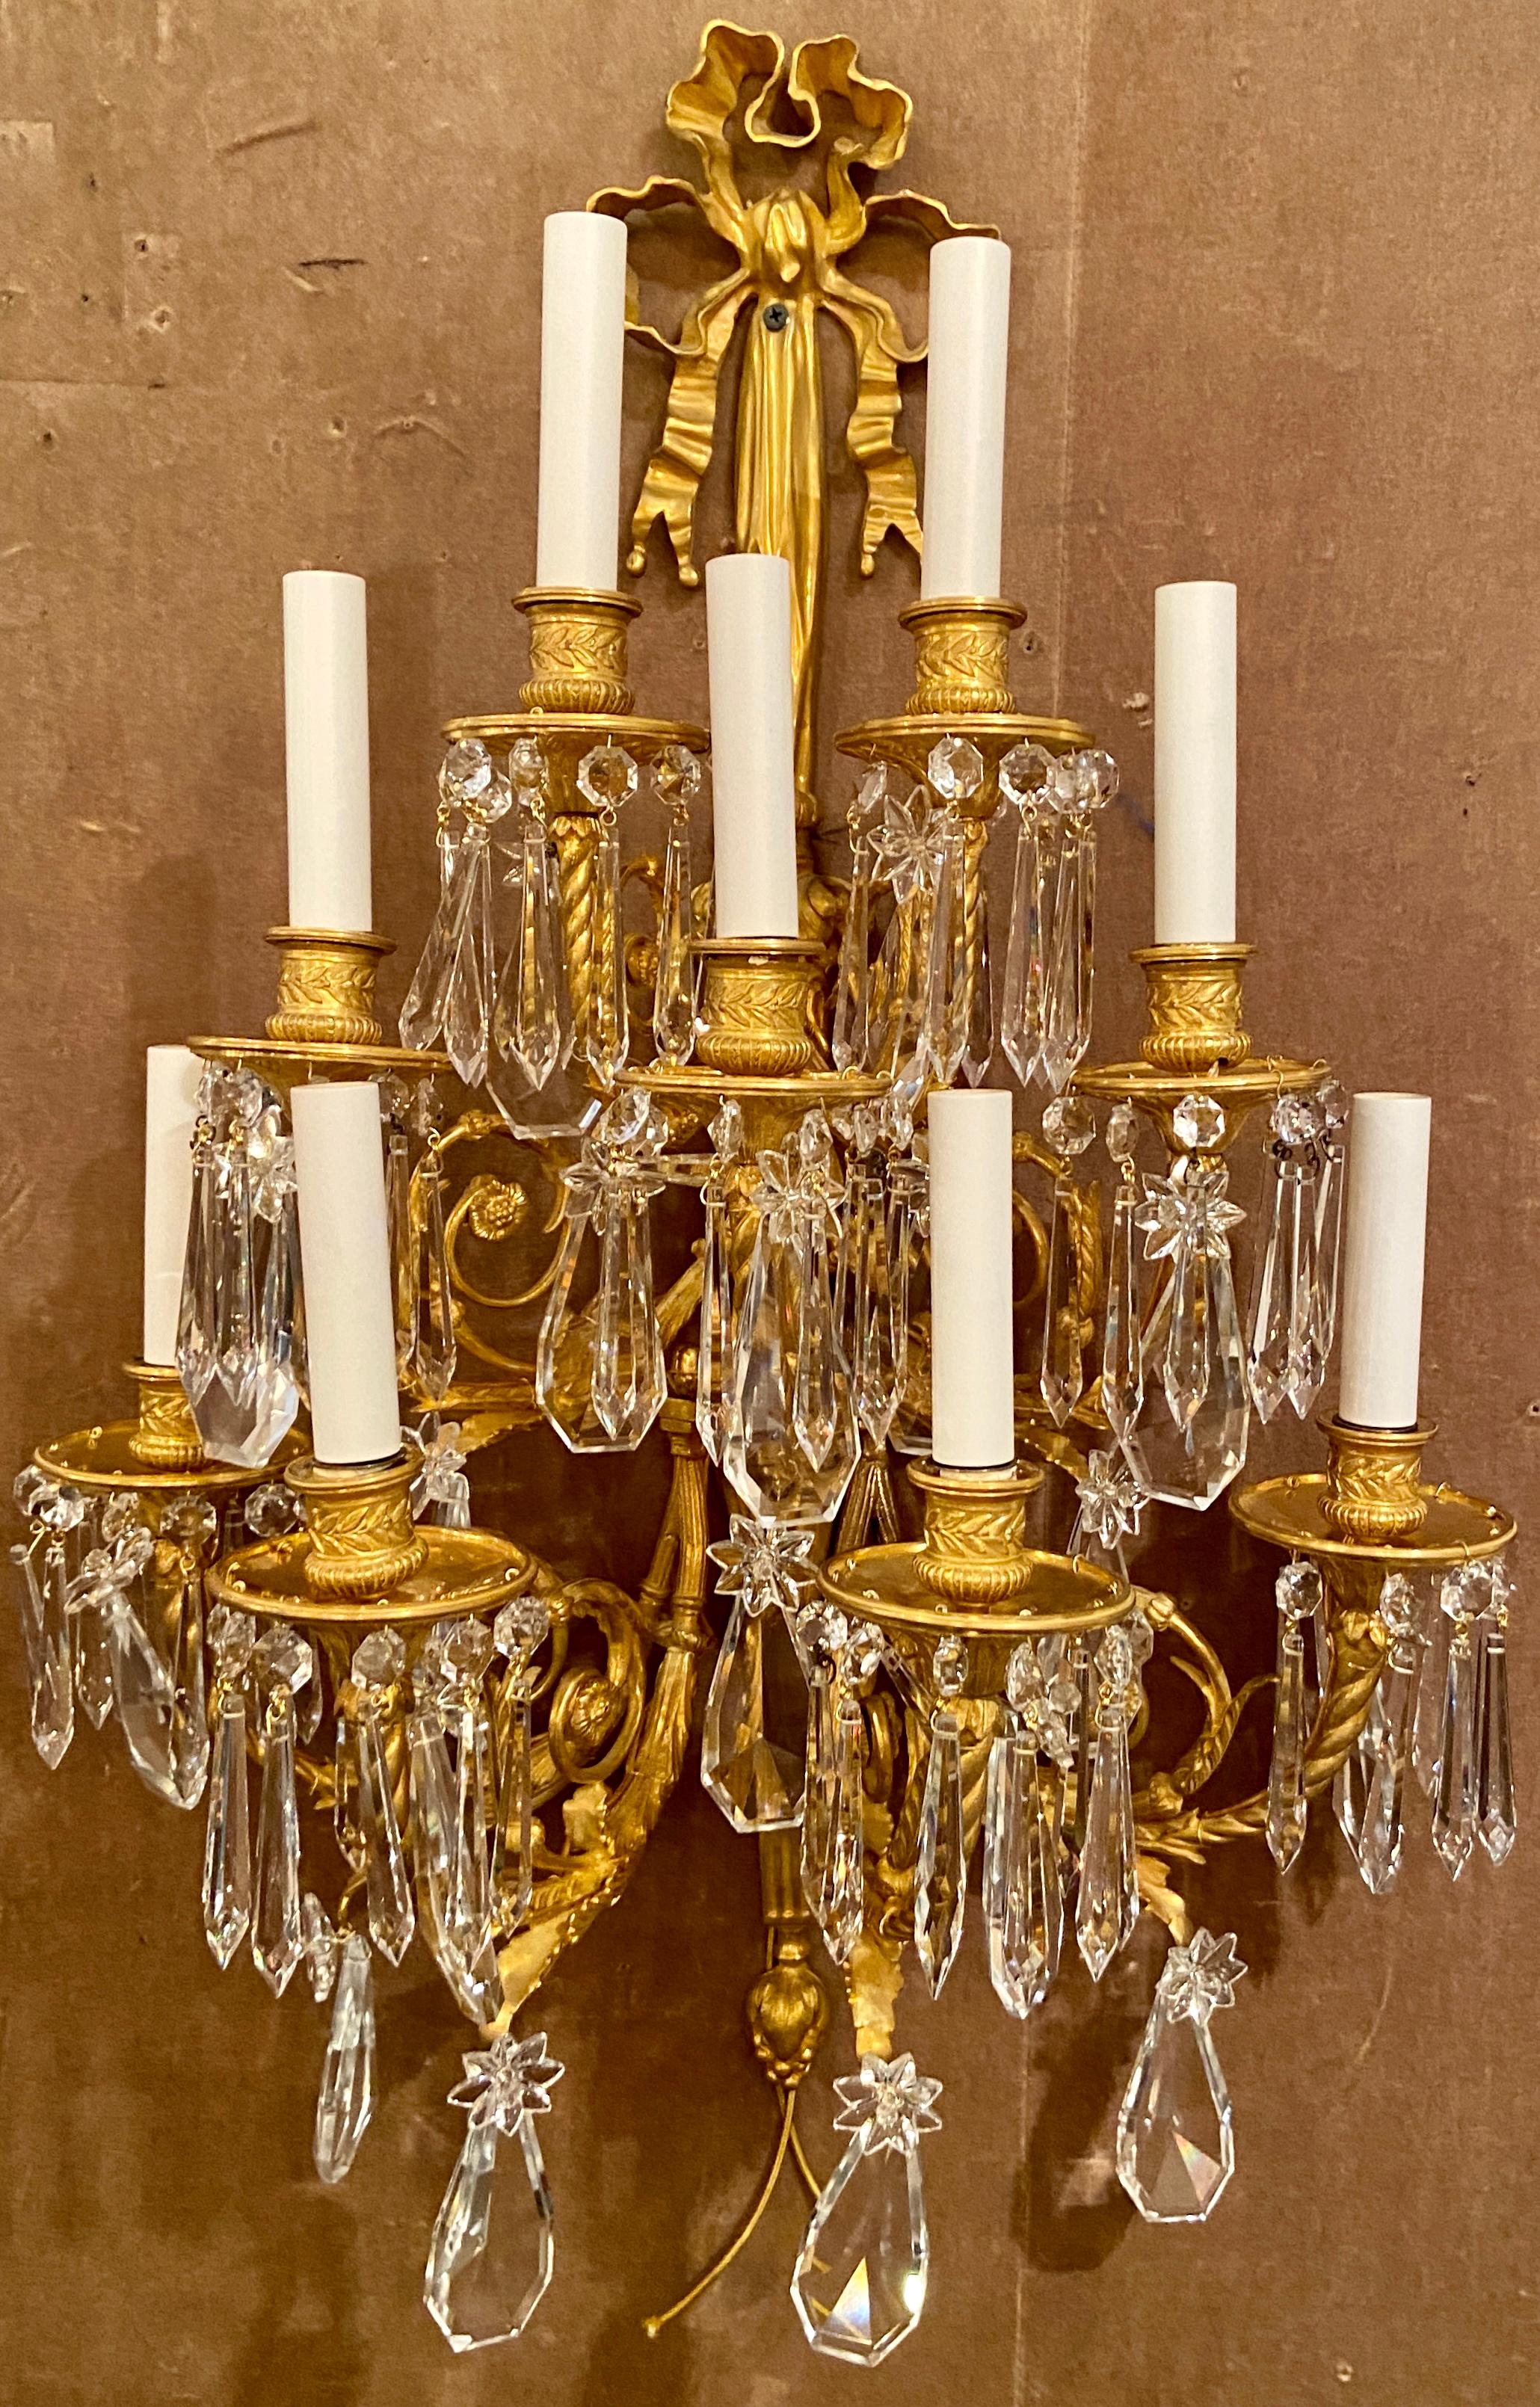 Pair Antique French Exceptional 9-Light Louis XVI Ormolu and Baccarat Crystal Sconces, Circa 1880-1890.